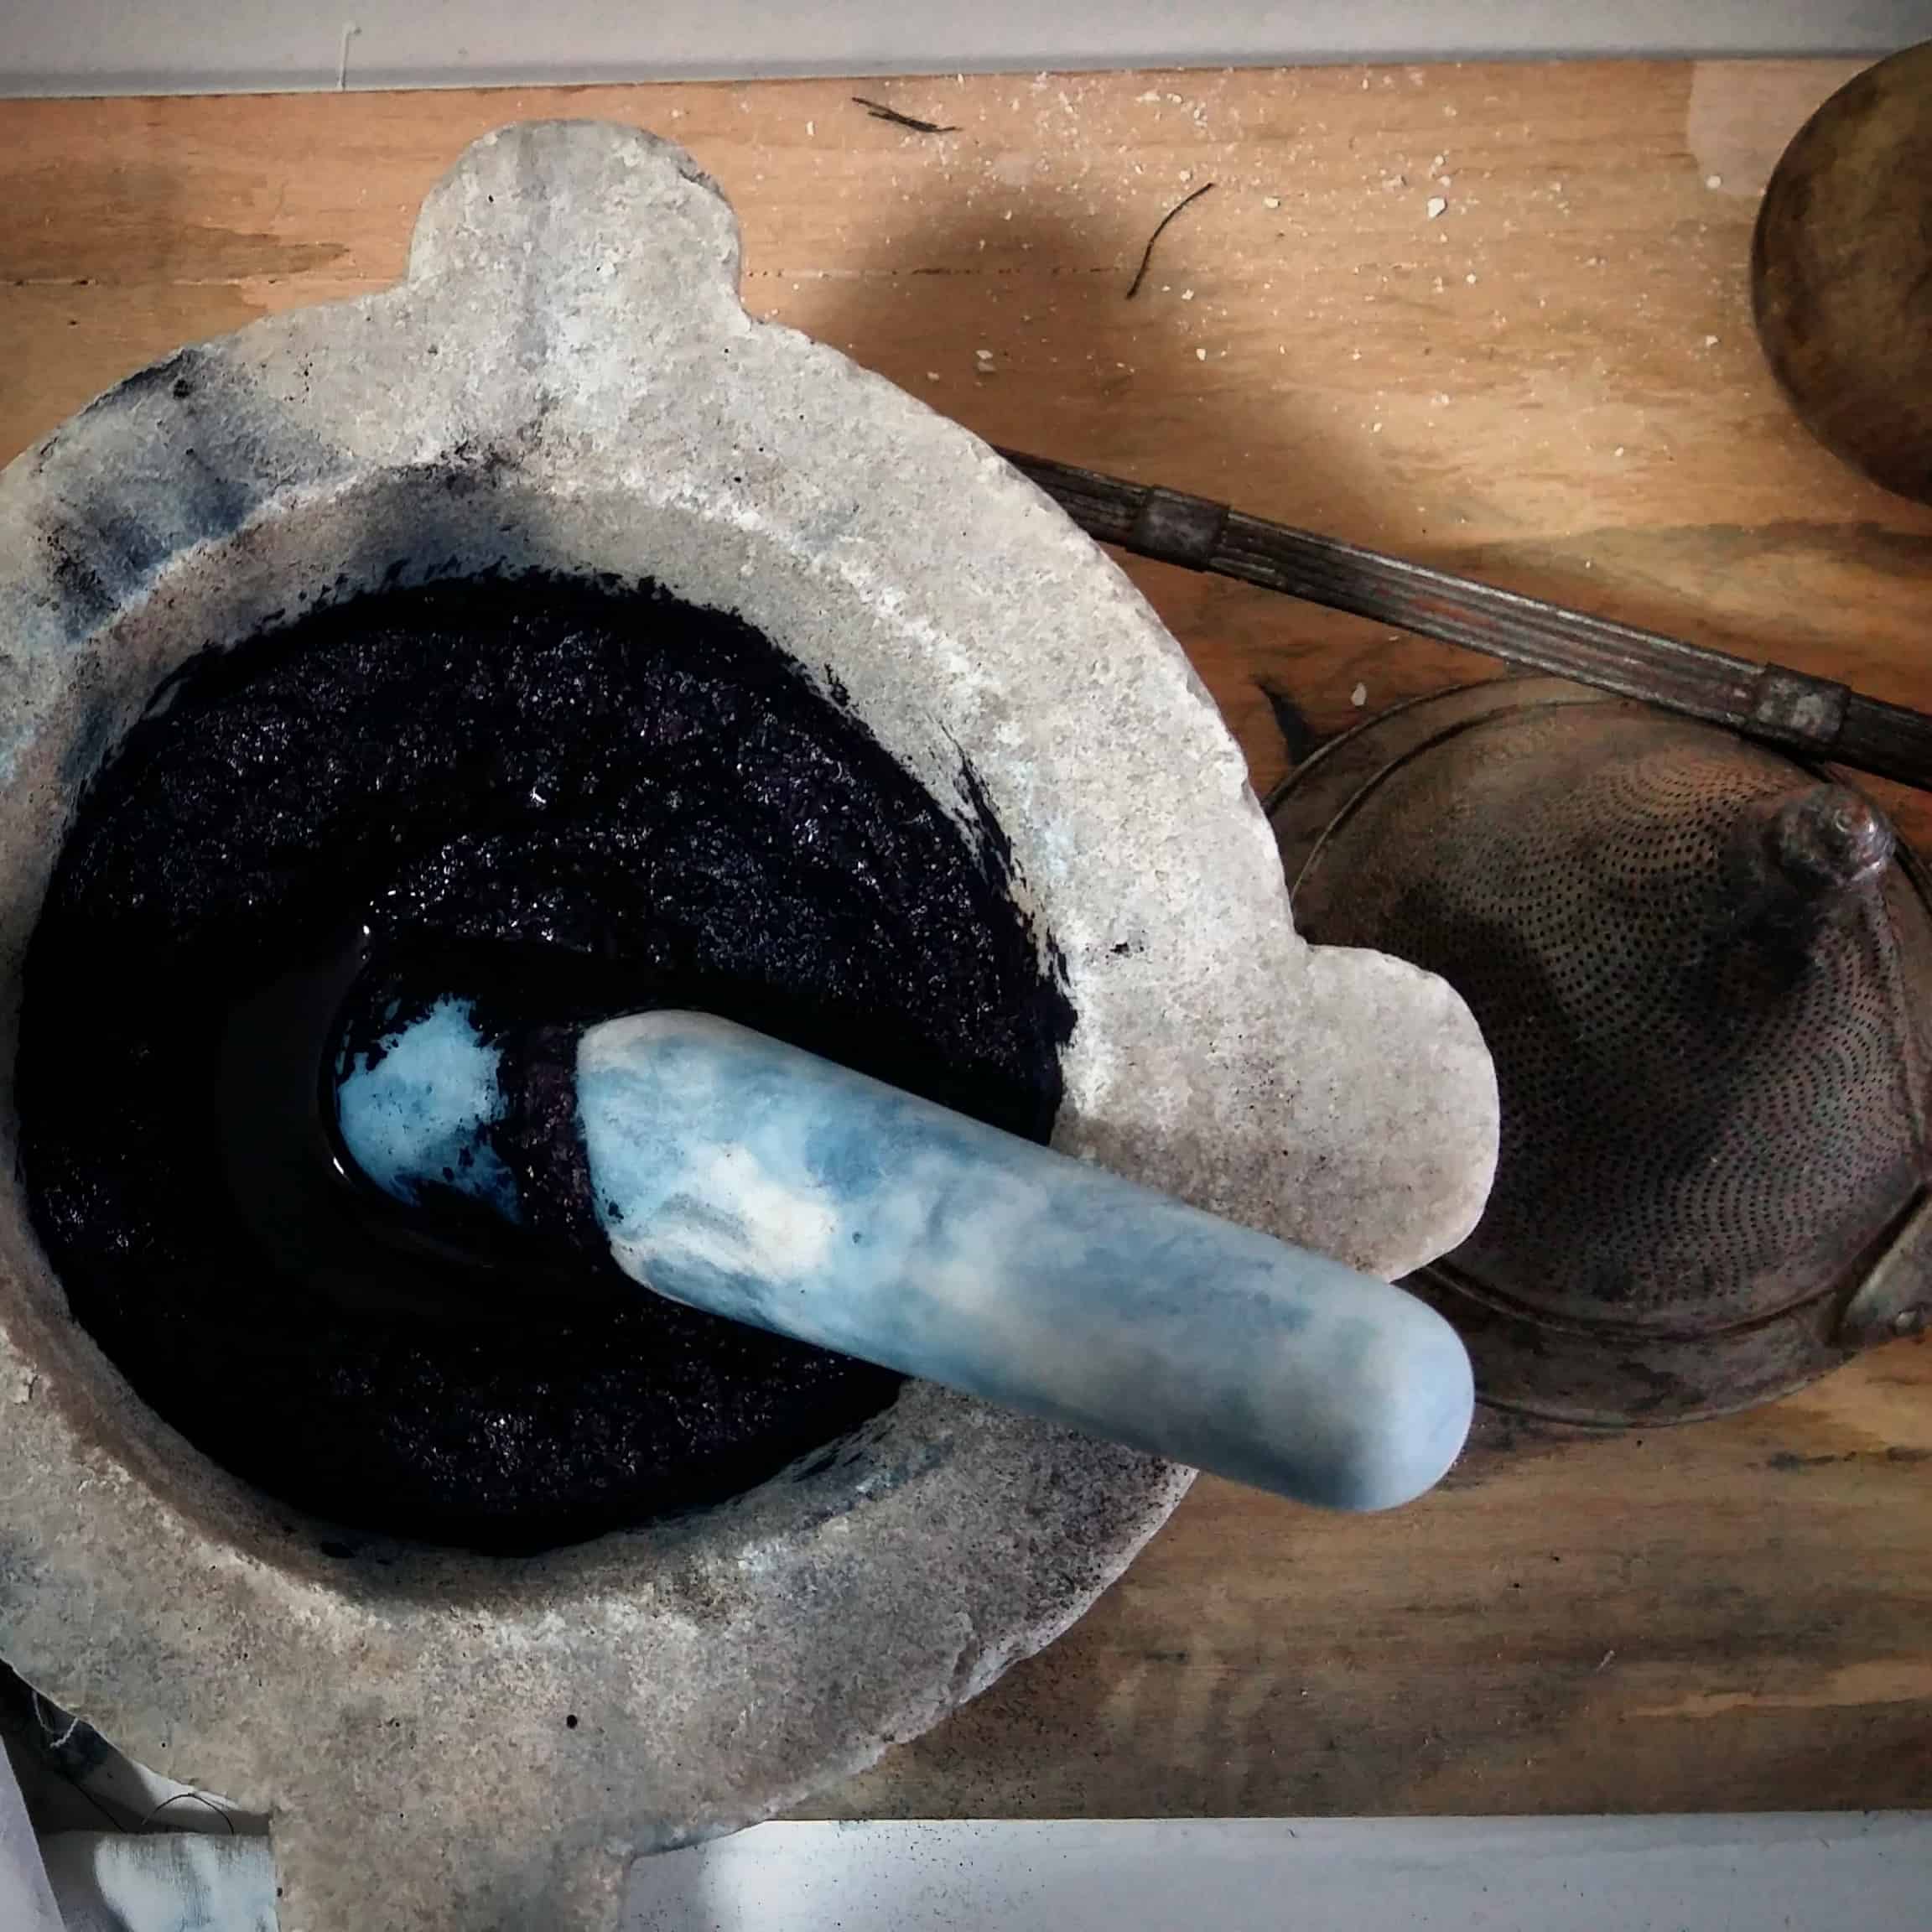 Picture of a pestle and mortar containing powdered indigo dye.